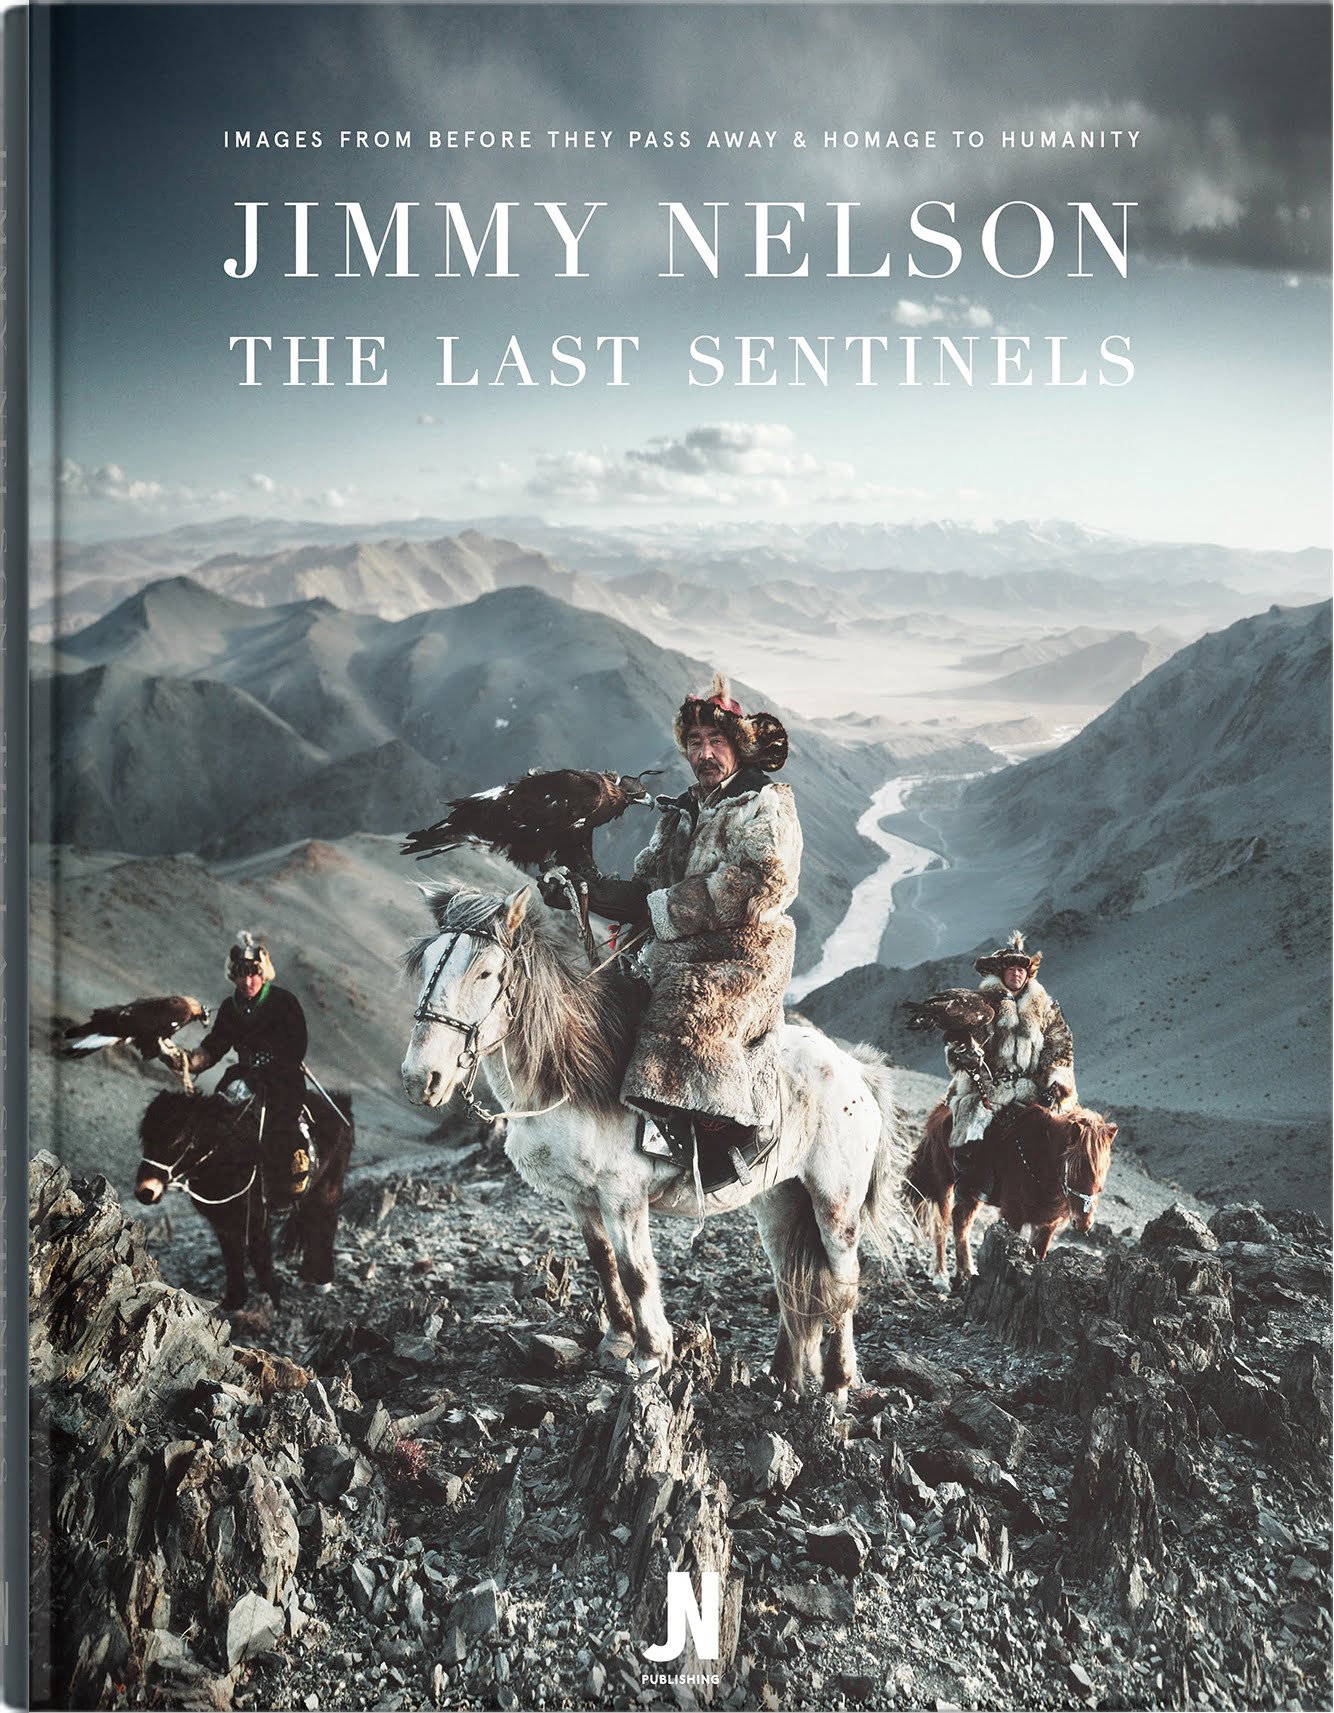 Jimmy Nelson: The Last Sentinels